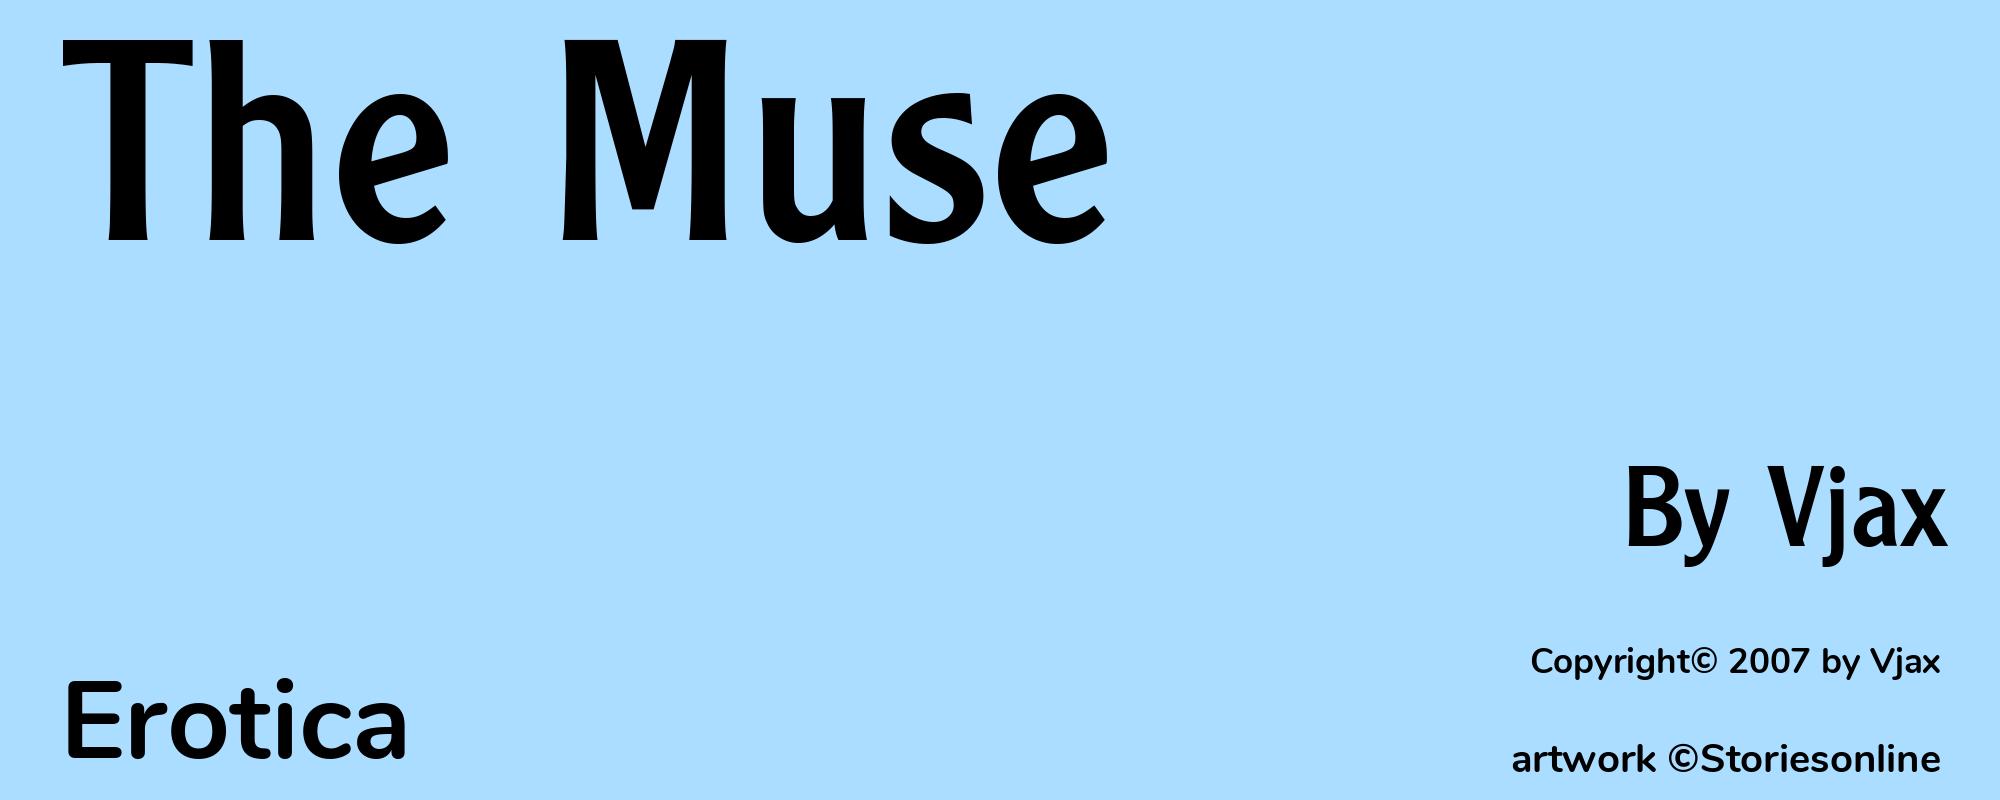 The Muse - Cover